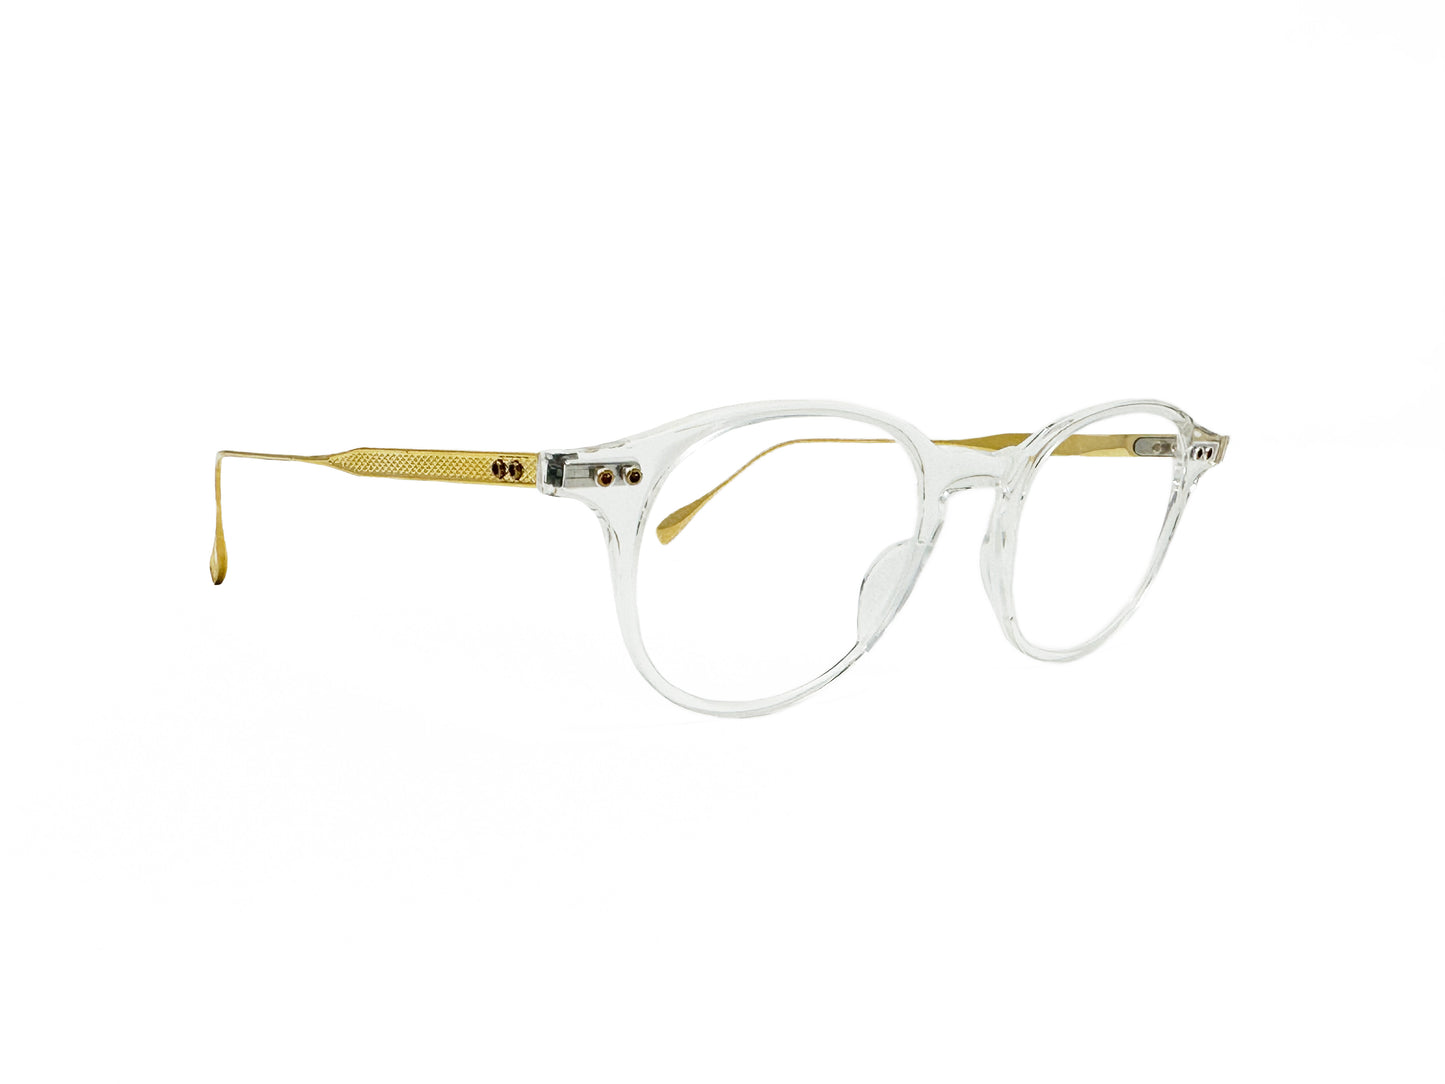 Dita round acetate optical frame with keyhole bridge and gold metal temples. Model: (Ash+). Color: CLR-GLD - Transparent acetate front with gold metal temples. Side view.